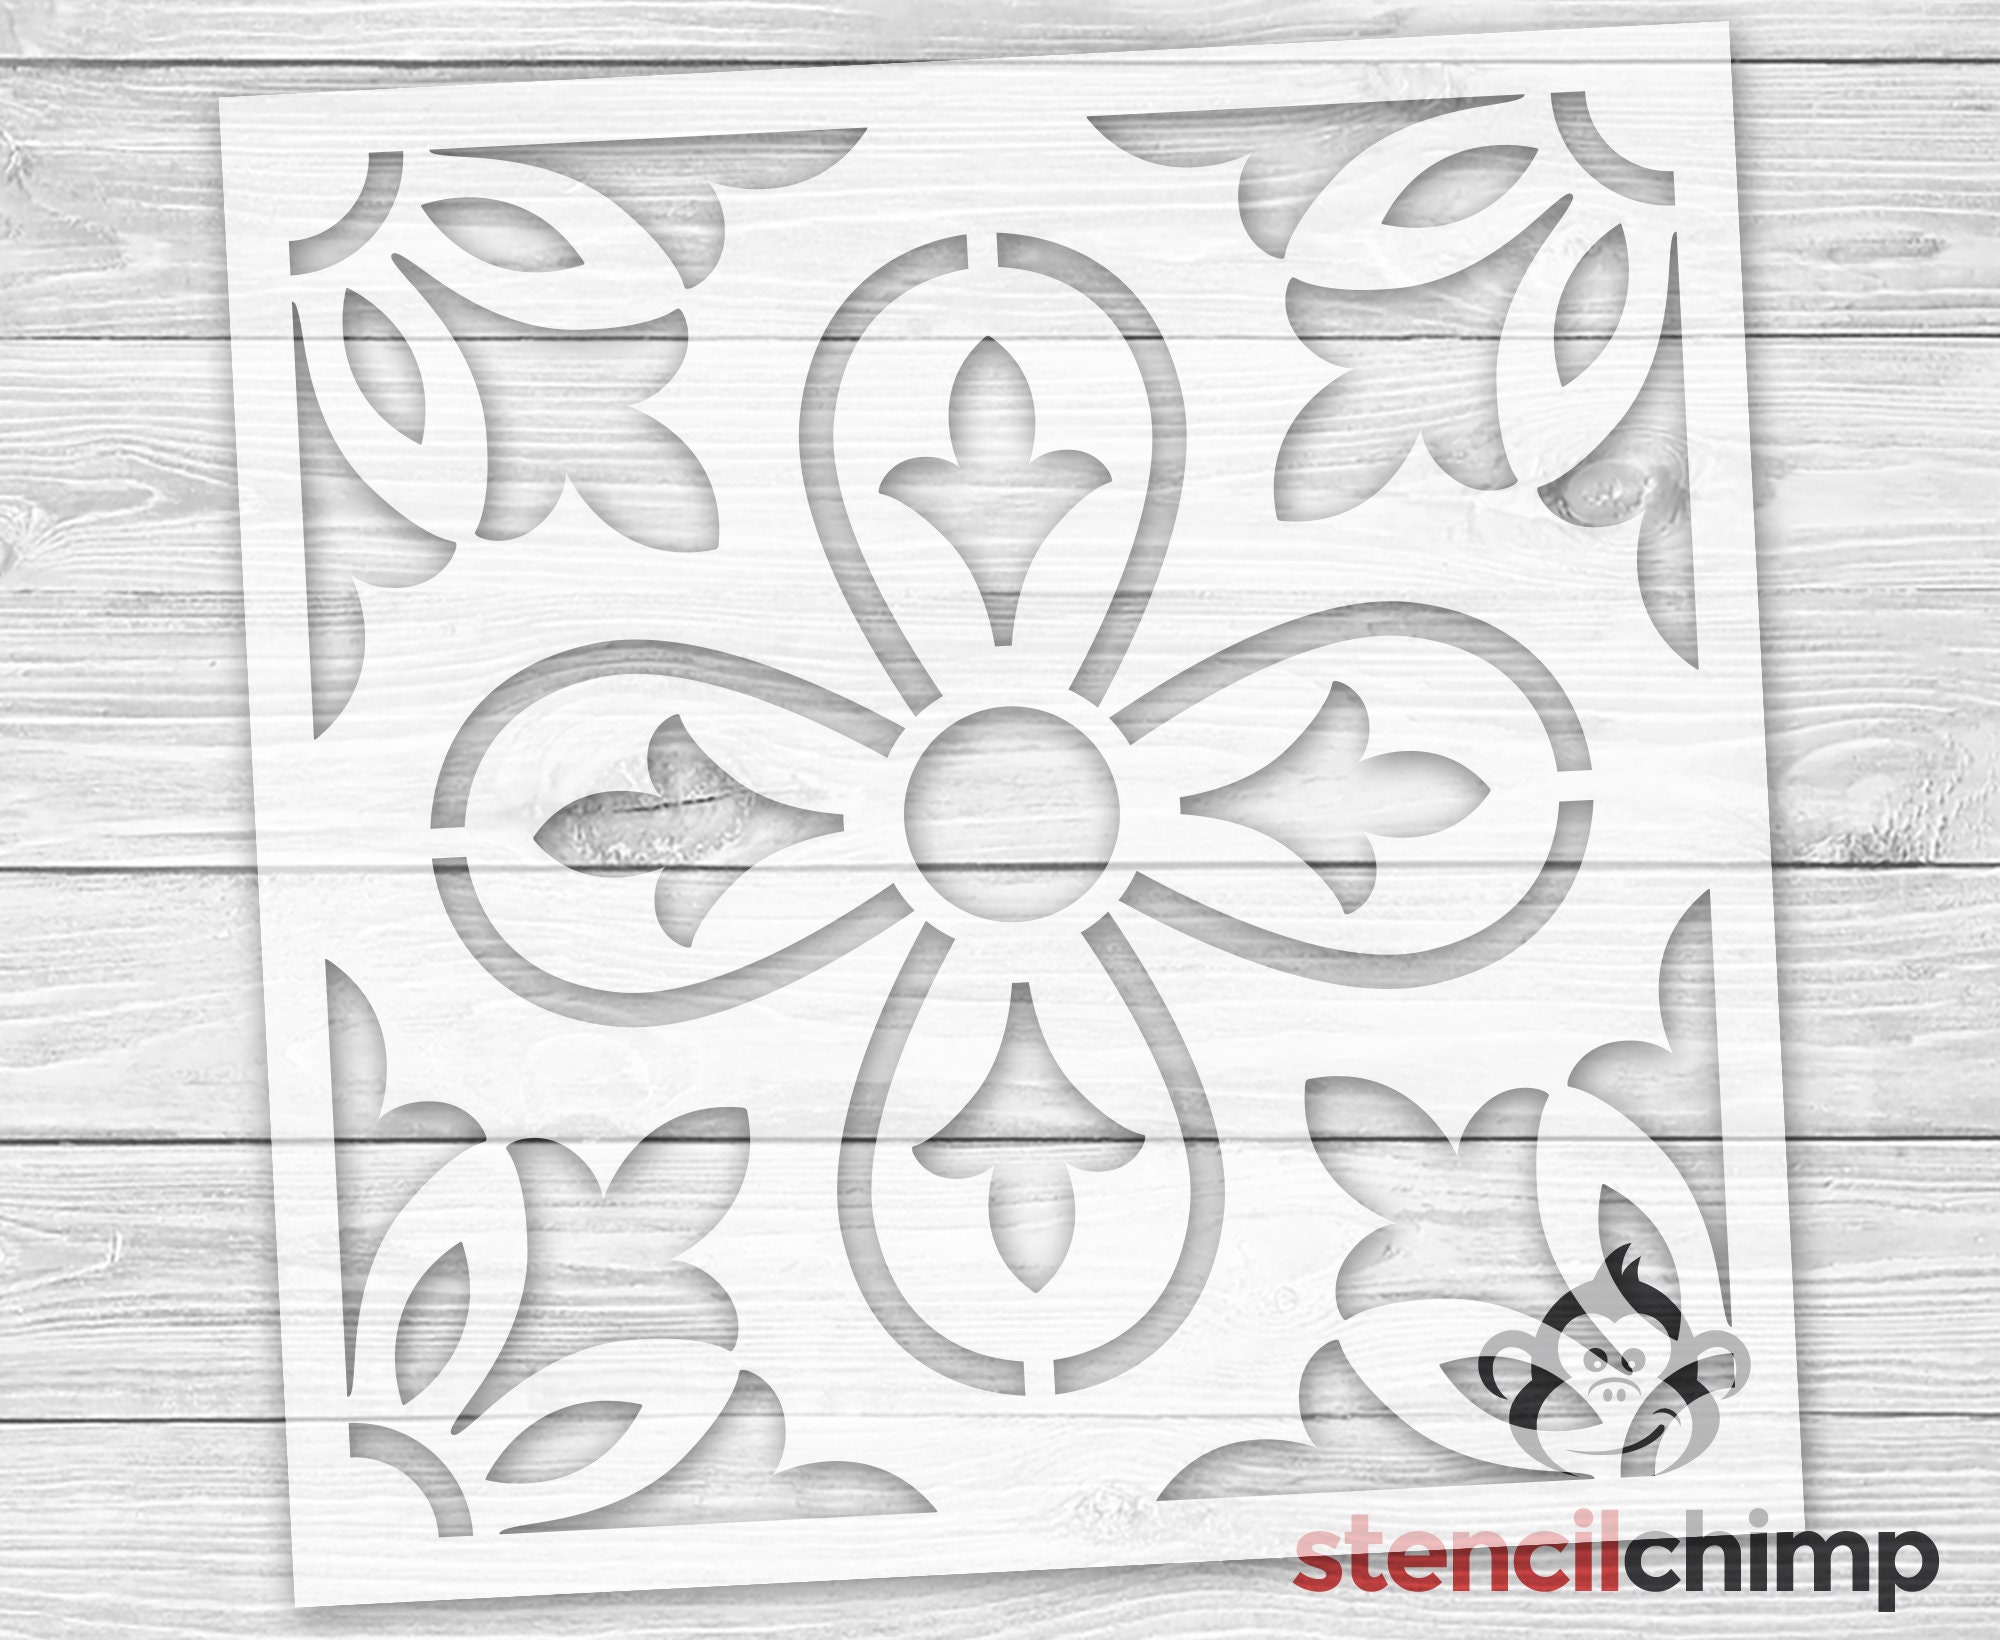 3 Inch Letter Stencils, Symbols, Numbers, Craft Stencils, Templates, 42 Pcs  Printable Templates, Interlocking Stencil Kit for Painting 